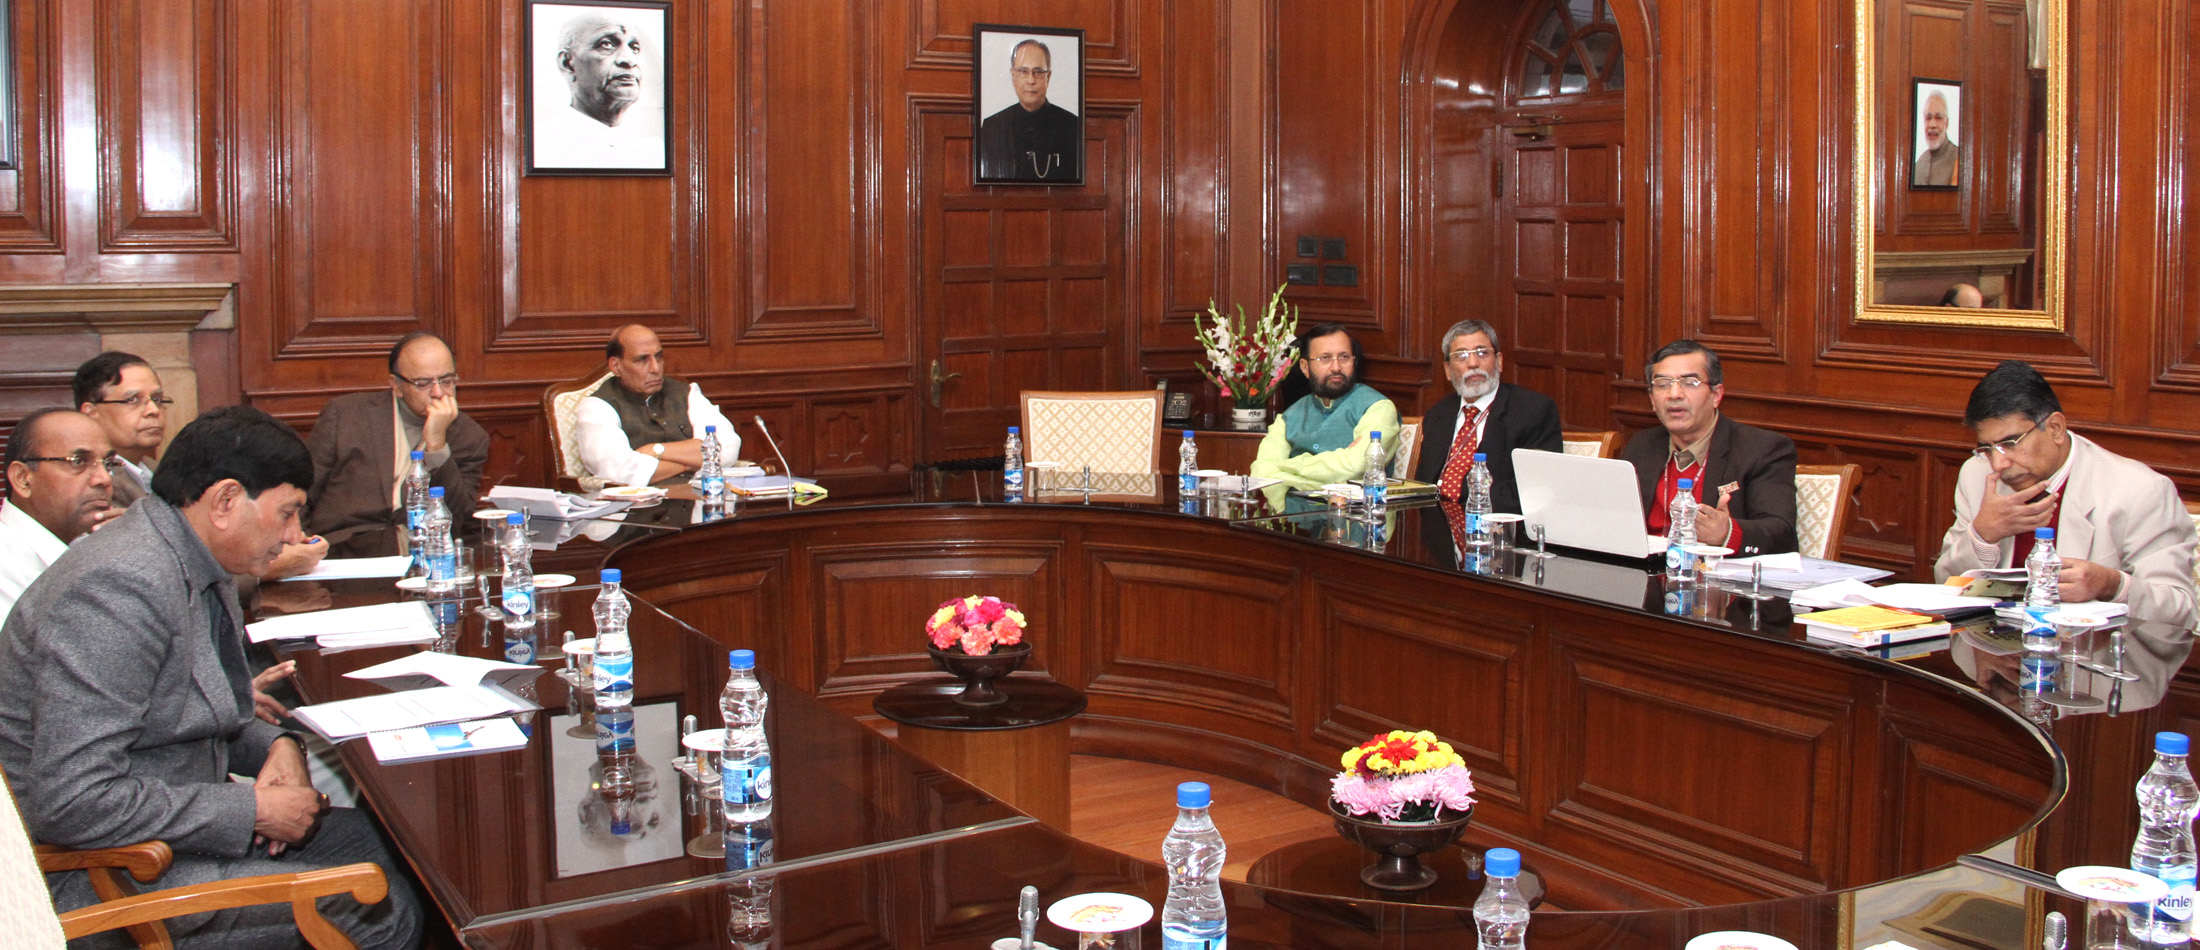 The Union Home Minister, Shri Rajnath Singh chairing a meeting of the Committee of Ministers on the Seeds Bill, in New Delhi on December 21, 2015.  The Union Minister for Finance, Corporate Affairs and Information & Broadcasting, Shri Arun Jaitley, the Union Minister for Heavy Industries and Public Enterprises, Shri Anant Geete, the Vice-Chairman, NITI Aayog, Shri Arvind Panagariya, the Minister of State for Environment, Forest and Climate Change (Independent Charge), Shri Prakash Javadekar, the Minister of State for Agriculture and Farmers Welfare, Shri Mohanbhai Kalyanjibhai Kundariya, the Union Agriculture Secretary, Shri Siraj Hussain and the senior officers of the Ministries of Home, Finance and Agriculture are also seen.